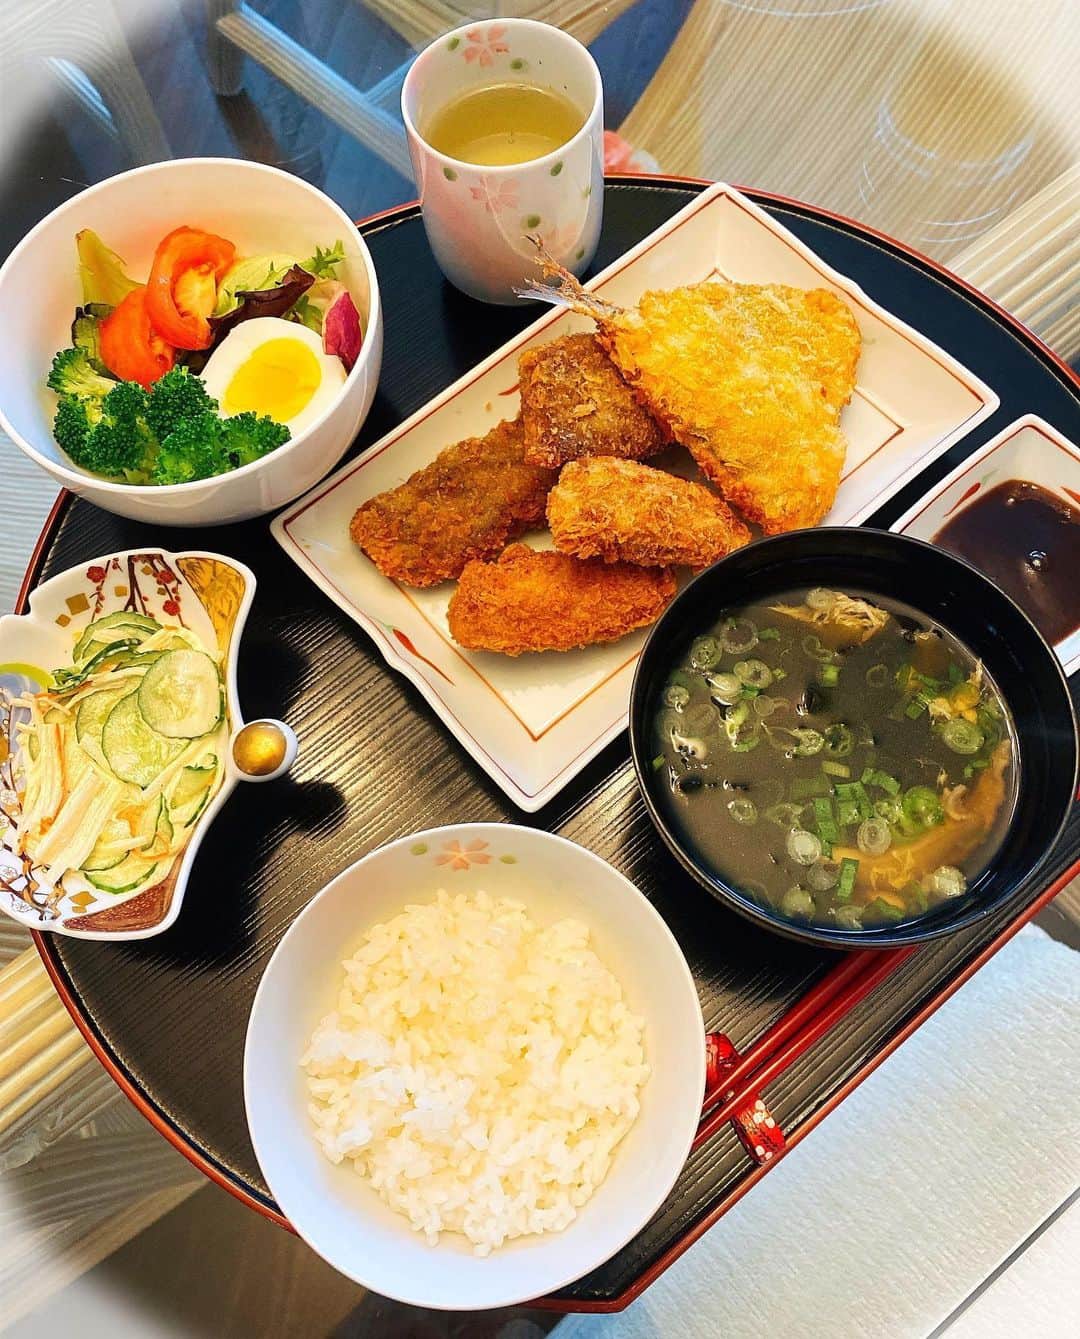 メロディー・モリタのインスタグラム：「Made tonight's dinner using my new deep frying pot!💕 Japanese aji-fry, kaki-fry, and katsu😋 J-supermarkets are continuing to limit the number of customers that can enter at once which can cause waiting time, so instead, I got delivered various cooking tools, condiments, etc.✨ * Out of the things I received, I Ioved the fact that Kit Kat changed their packaging from plastic to paper.💚 I thought their hashtag to end plastic waste, "Kitto Zutto" (surely forever) was touching, and I made a crane out of that packaging. sweet treat to wrap up my day!☺️ * 今日の晩ご飯！🍚🥢✨ 新しく届いた天ぷら鍋を使って、まわりがサクサク、中はふっくらジューシーなアジフライ＆カキフライなど😋 * 日系スーパーは今も人数制限で、暑い中30分は外で並ばなければならず... そこで、日本の食材などを自宅まで届けてくれるNYのサービスを利用してみました✨ * キットカット（抹茶味）のパッケージが紙に変わっていることを発見！環境にも優しい食後のデザートに癒されながら、外袋で久しぶりに鶴を折ってみました☺️ #dinner #Japanesefood #cooking #NY #midoriya #thankyou #キットずっと #ニューヨーク #晩ご飯」